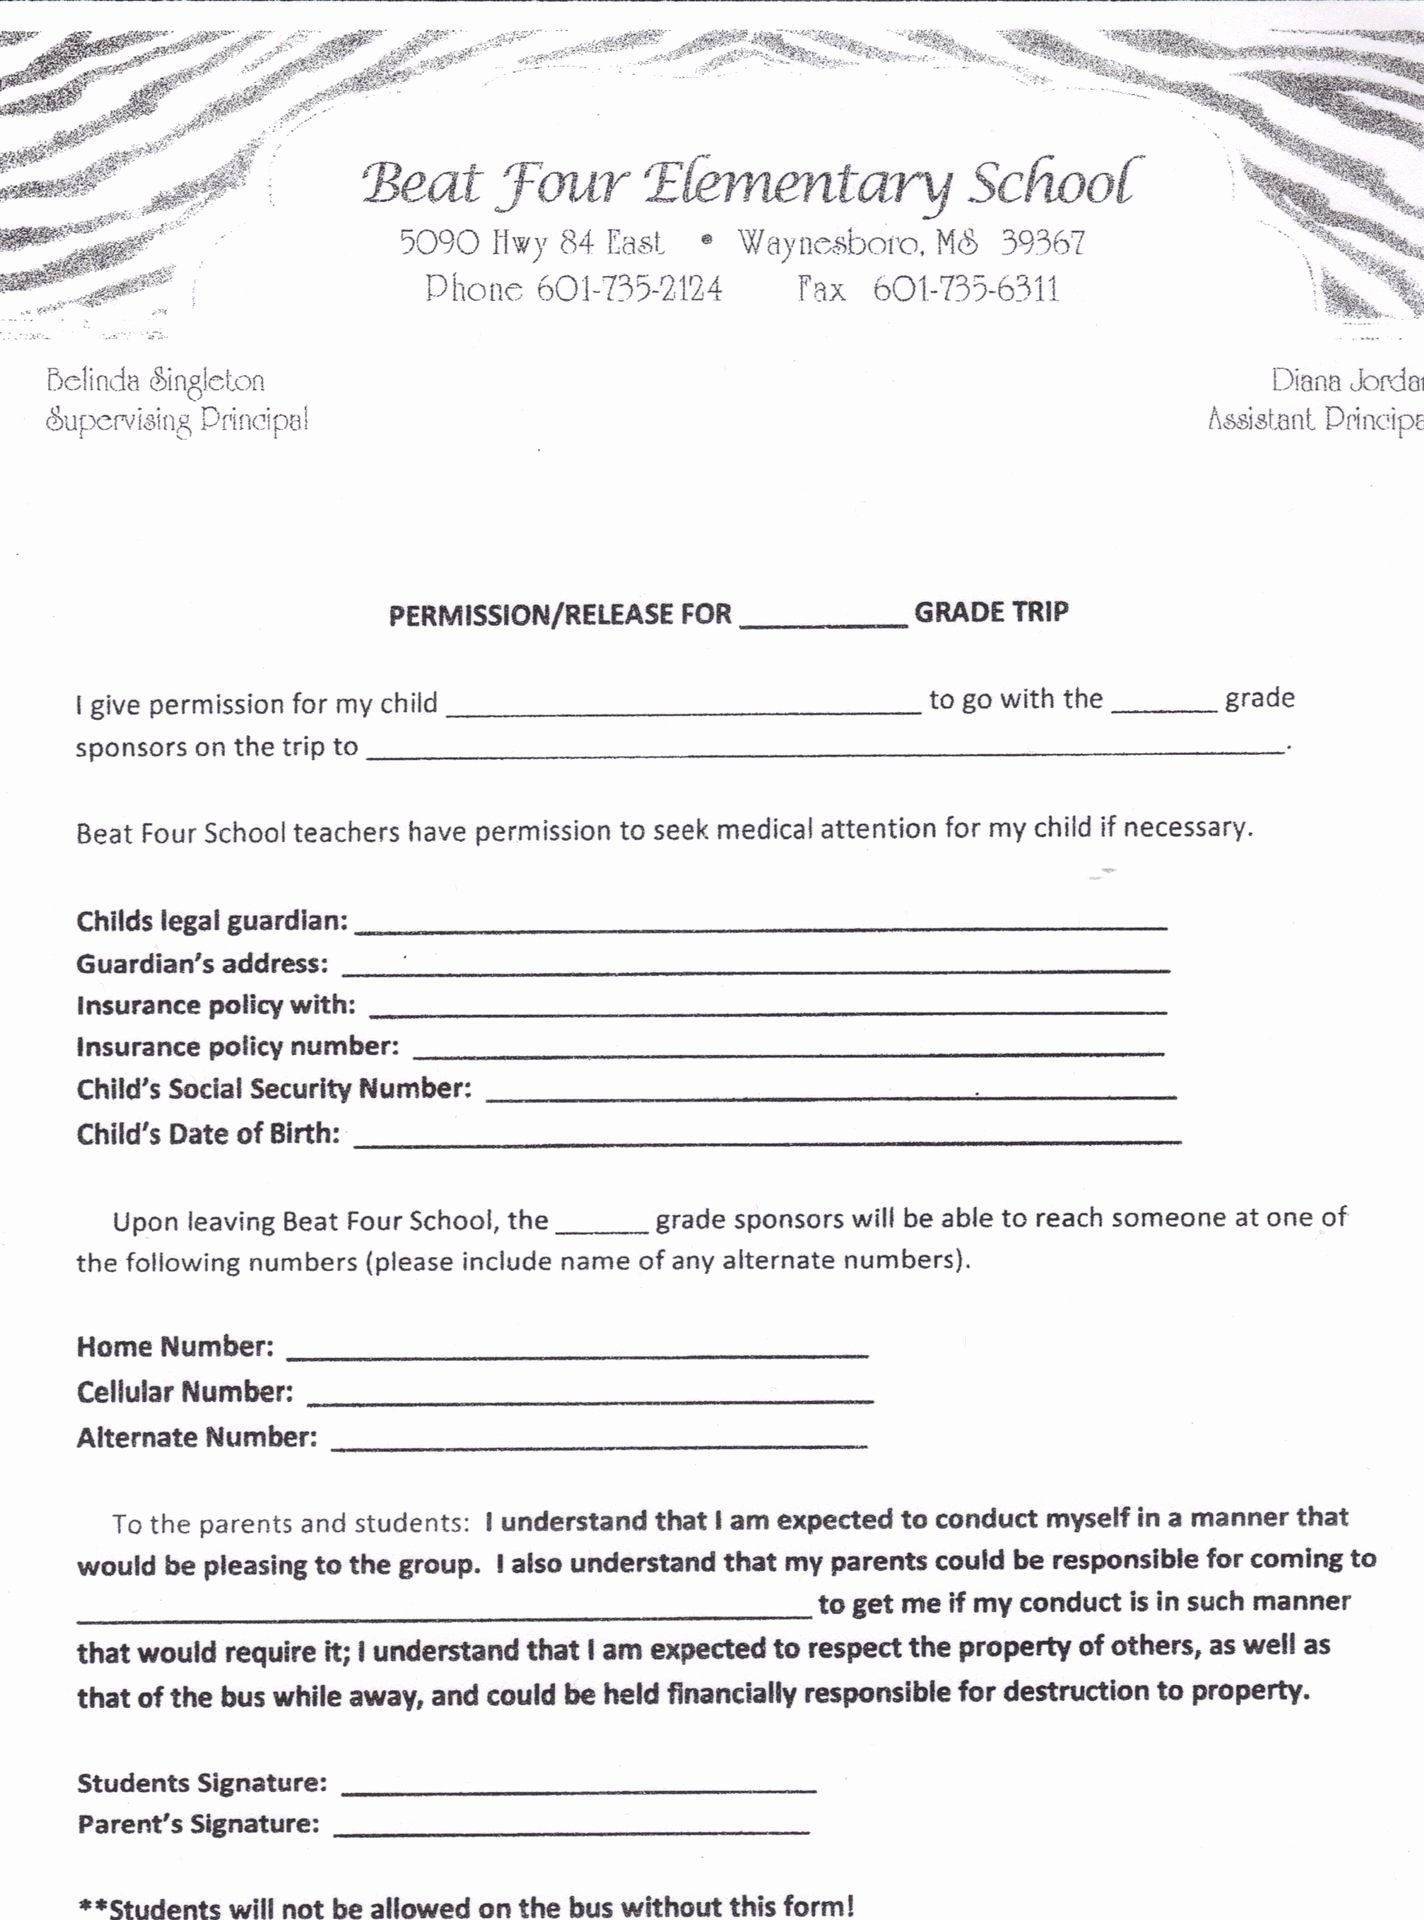 Field Trip Permission Slip form Awesome forms Beat Four School